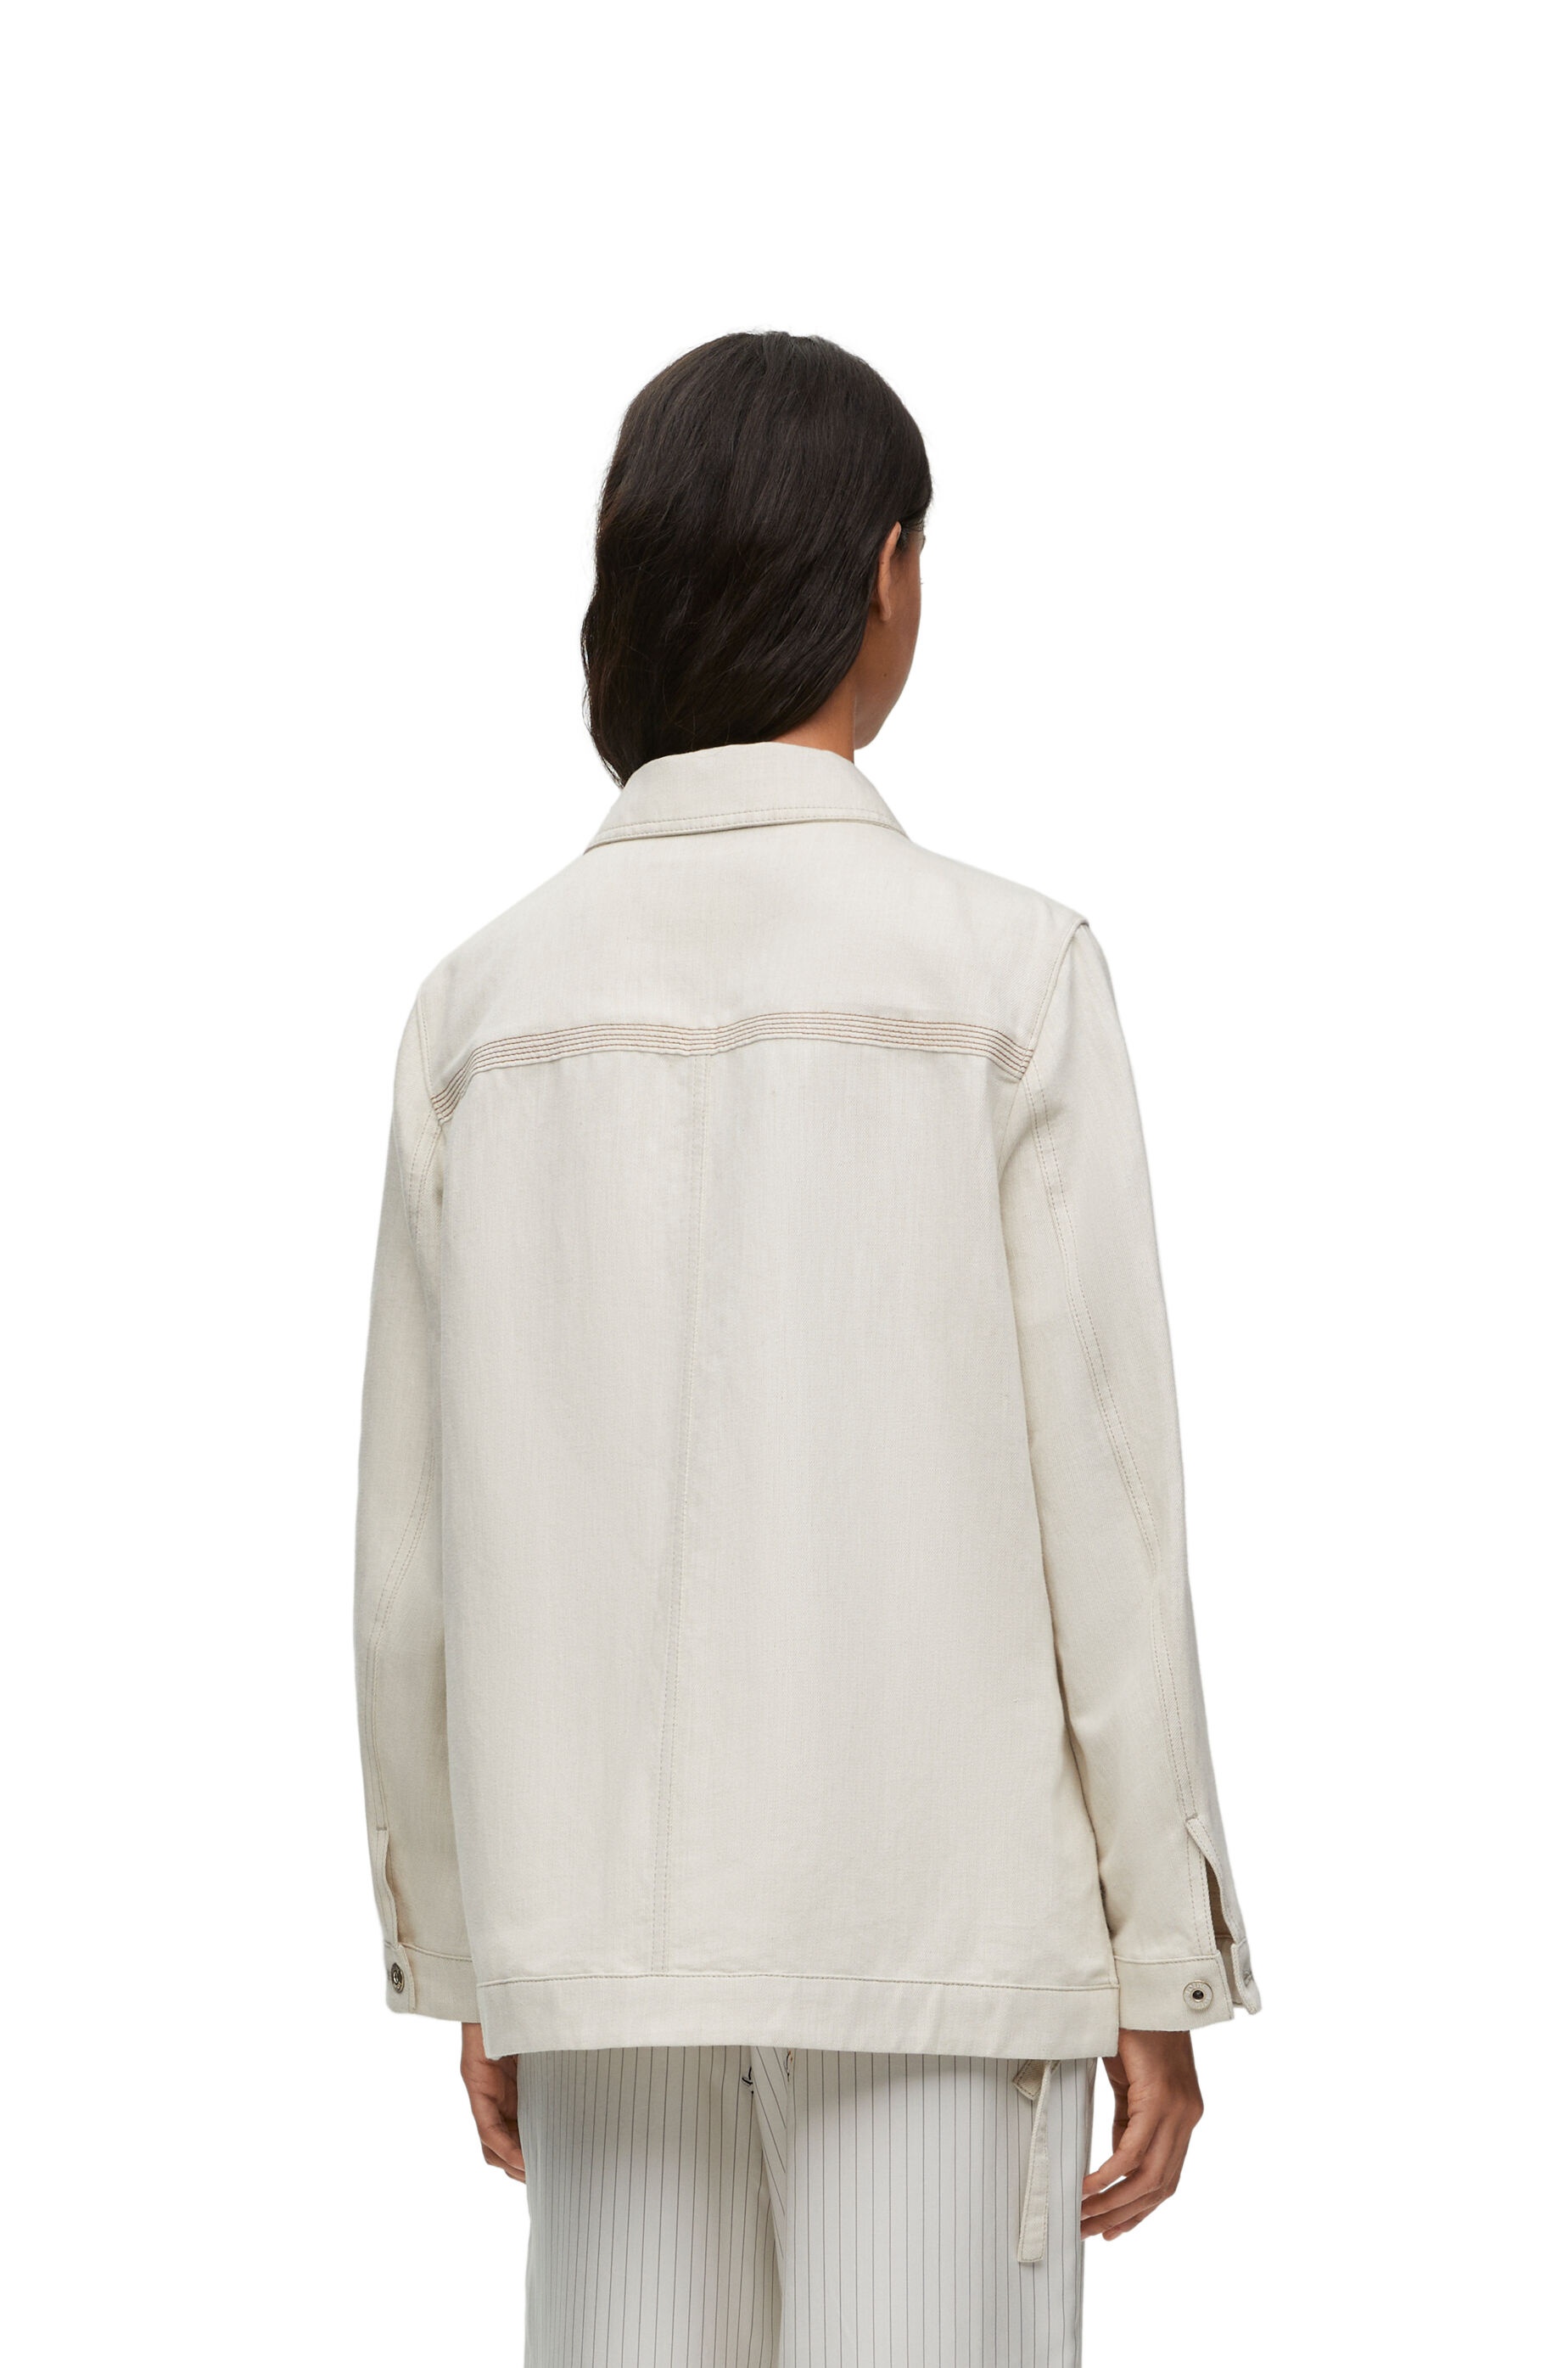 Workwear jacket in cotton and linen - 4